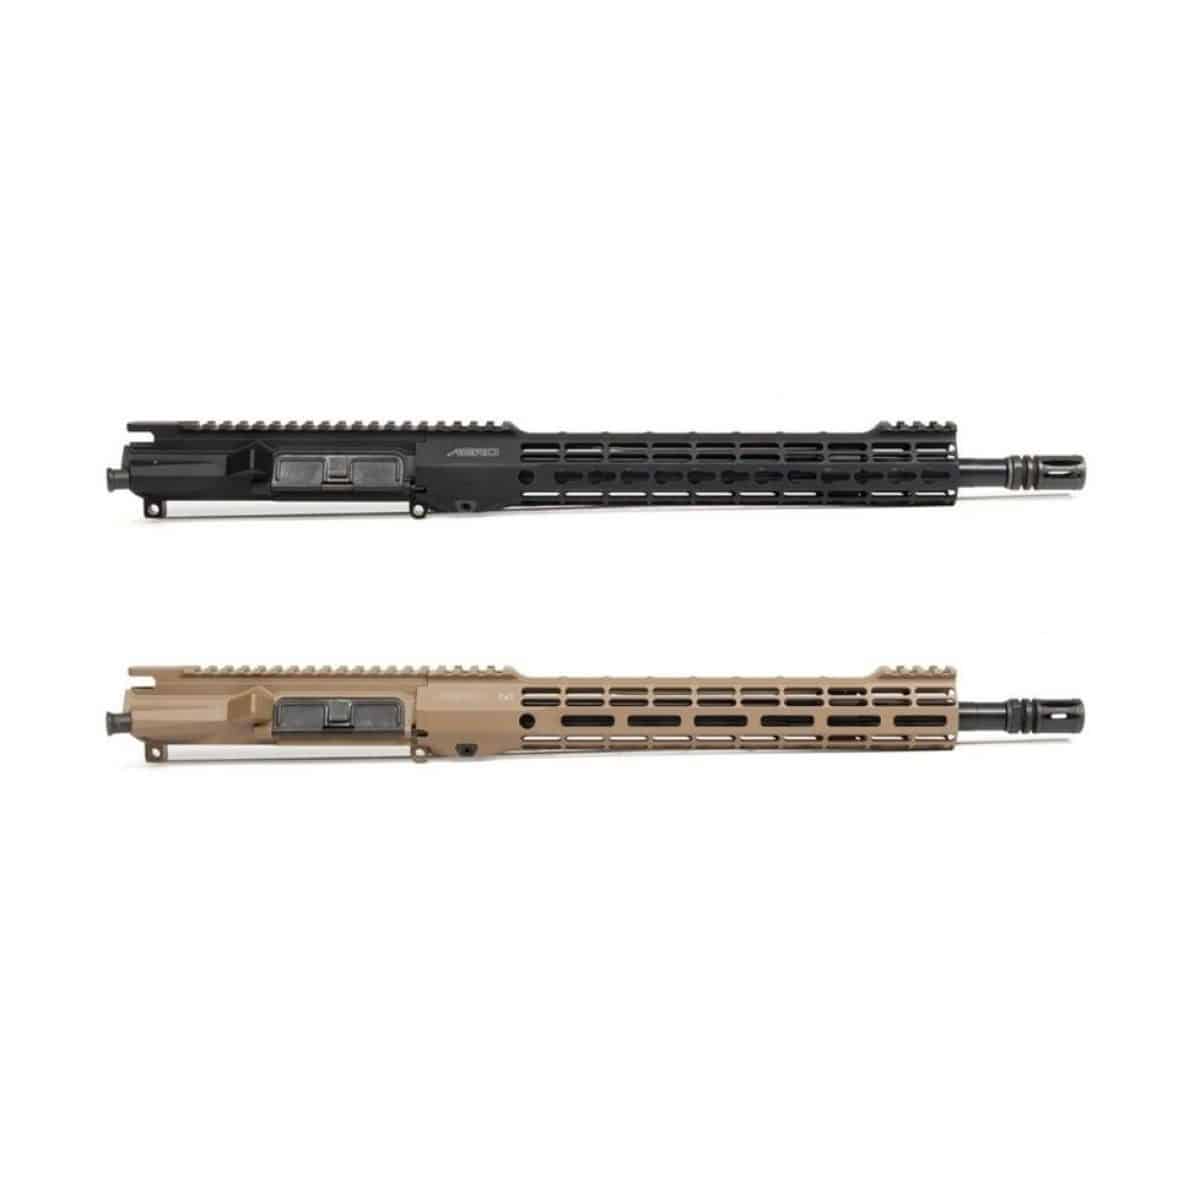 opplanet aero precision m4e1 threaded 145in 556 mid length w atlas s one handguard complete upper receiver mcimage spids 94567 96042 vids